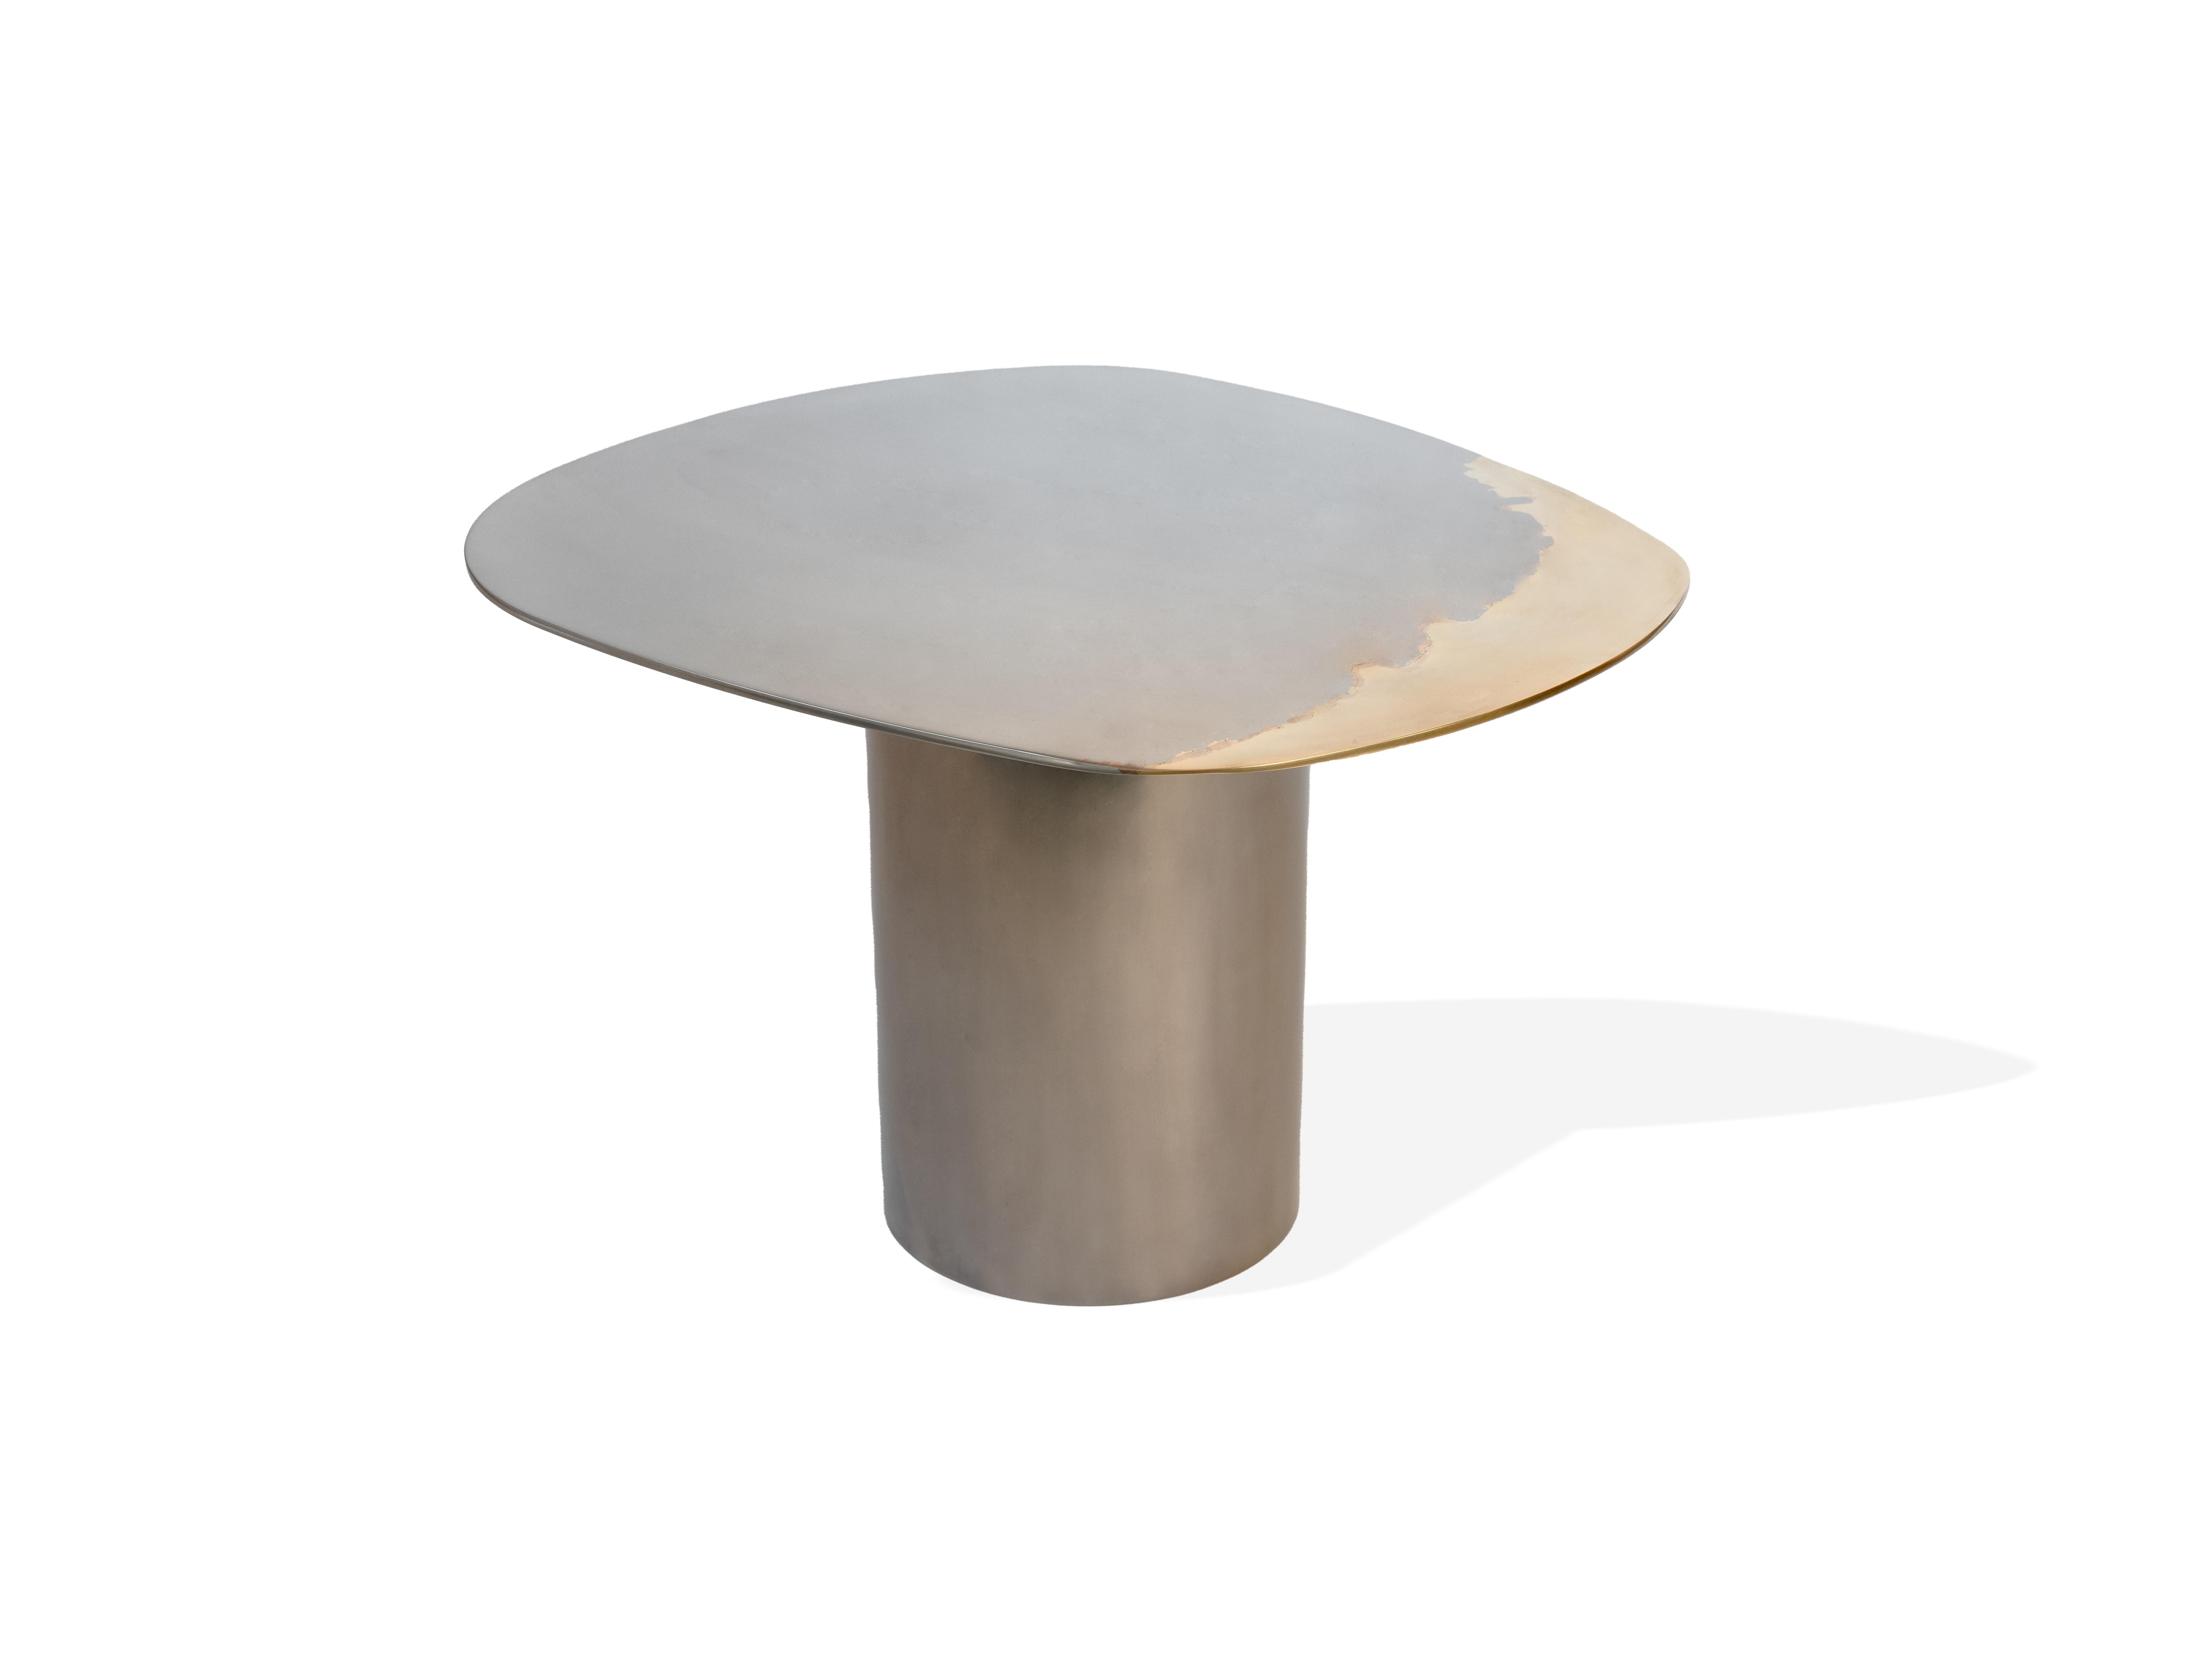 A side table as part of the Transition collection, featuring a unique, artistic mirror polished tabletop, crafted from brass and stainless steel on a tubular base. Measures: H 18”.


Studio Warm has developed a distinctive, high-end, artistic finish